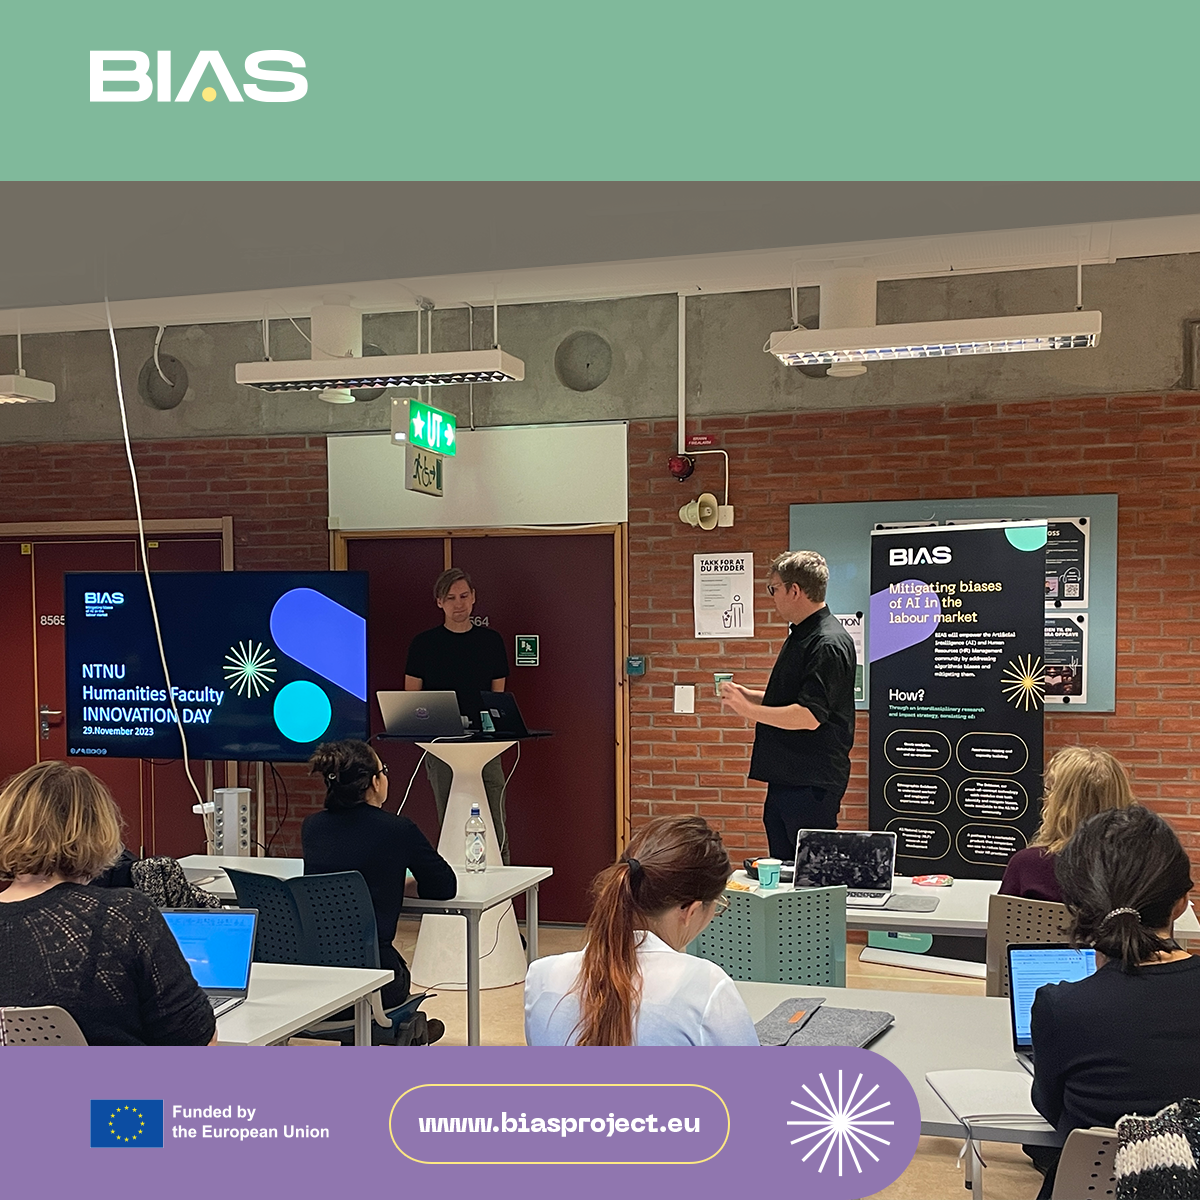 NTNU Faculty of Humanities Innovation Day, Powered by the BIAS Project